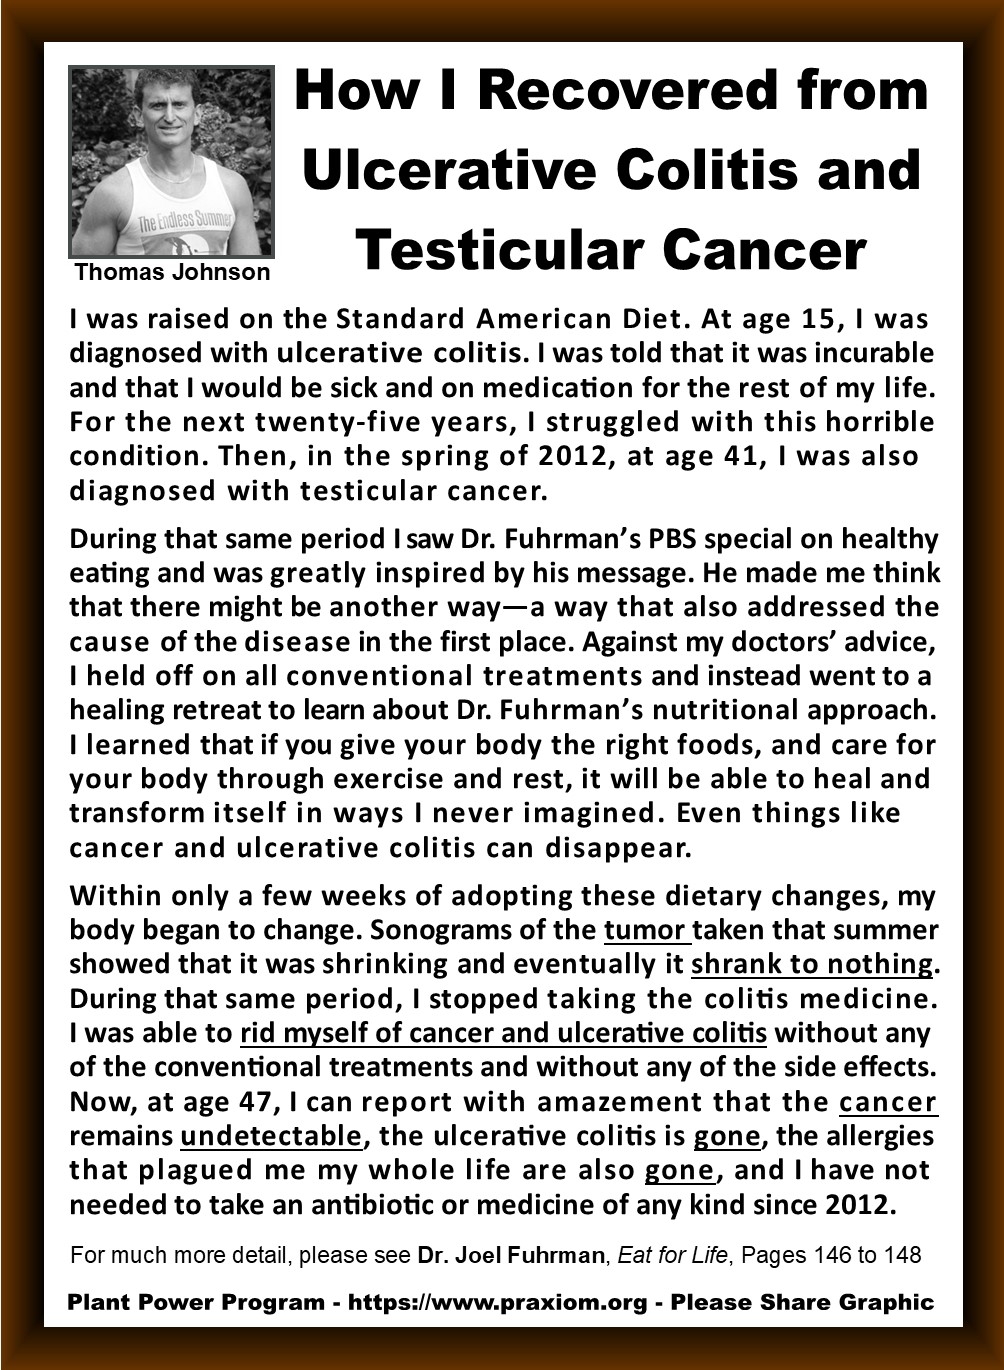 Ulcerative Colitis and Testicular Cancer Success Story